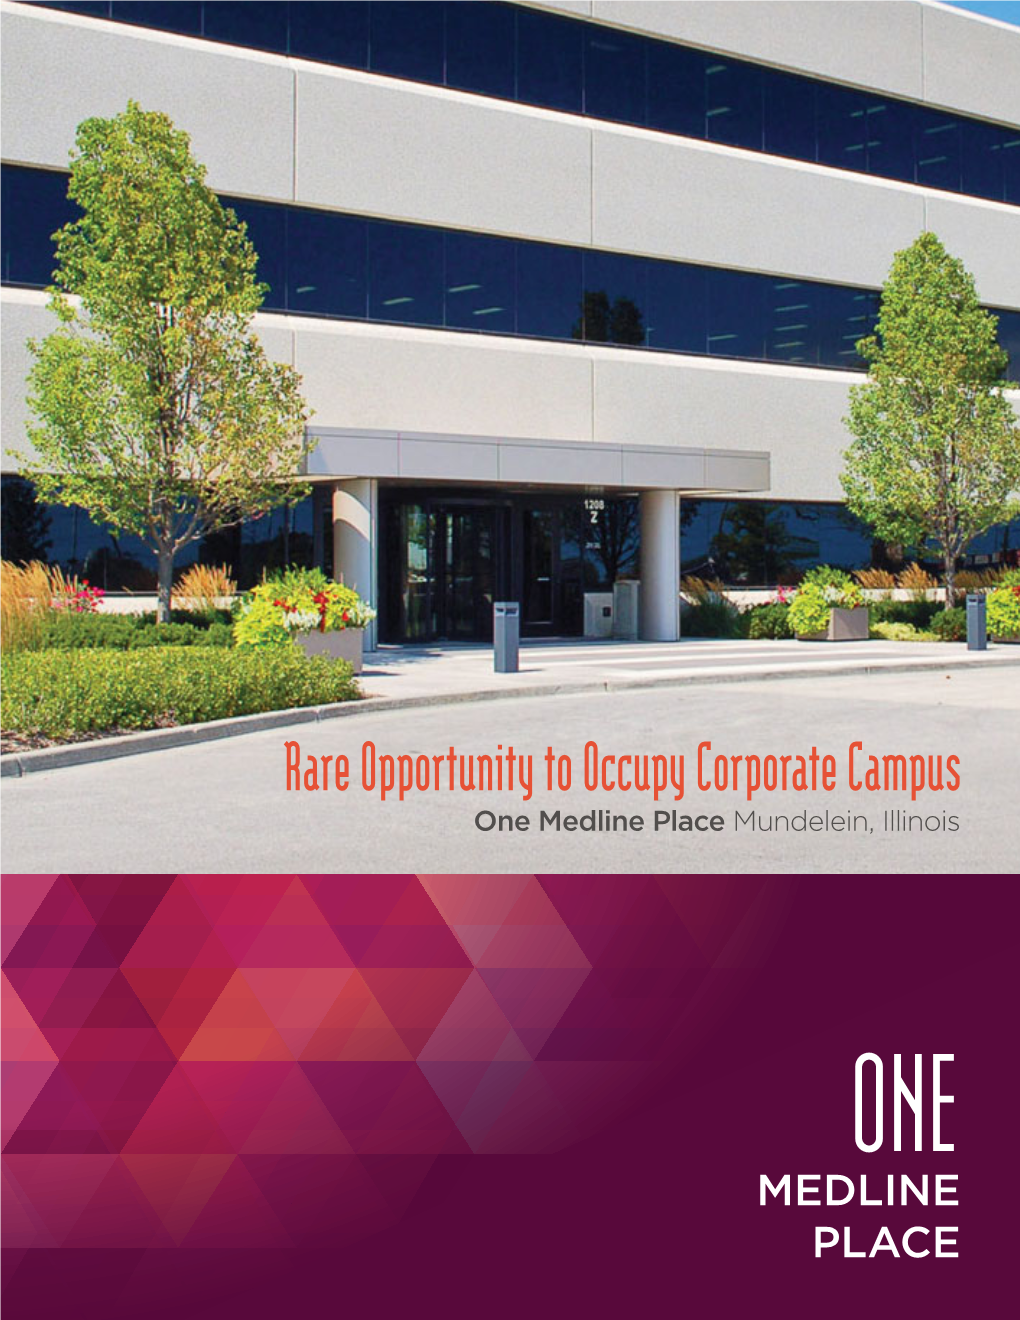 Rare Opportunity to Occupy Corporate Campus One Medline Place Mundelein, Illinois